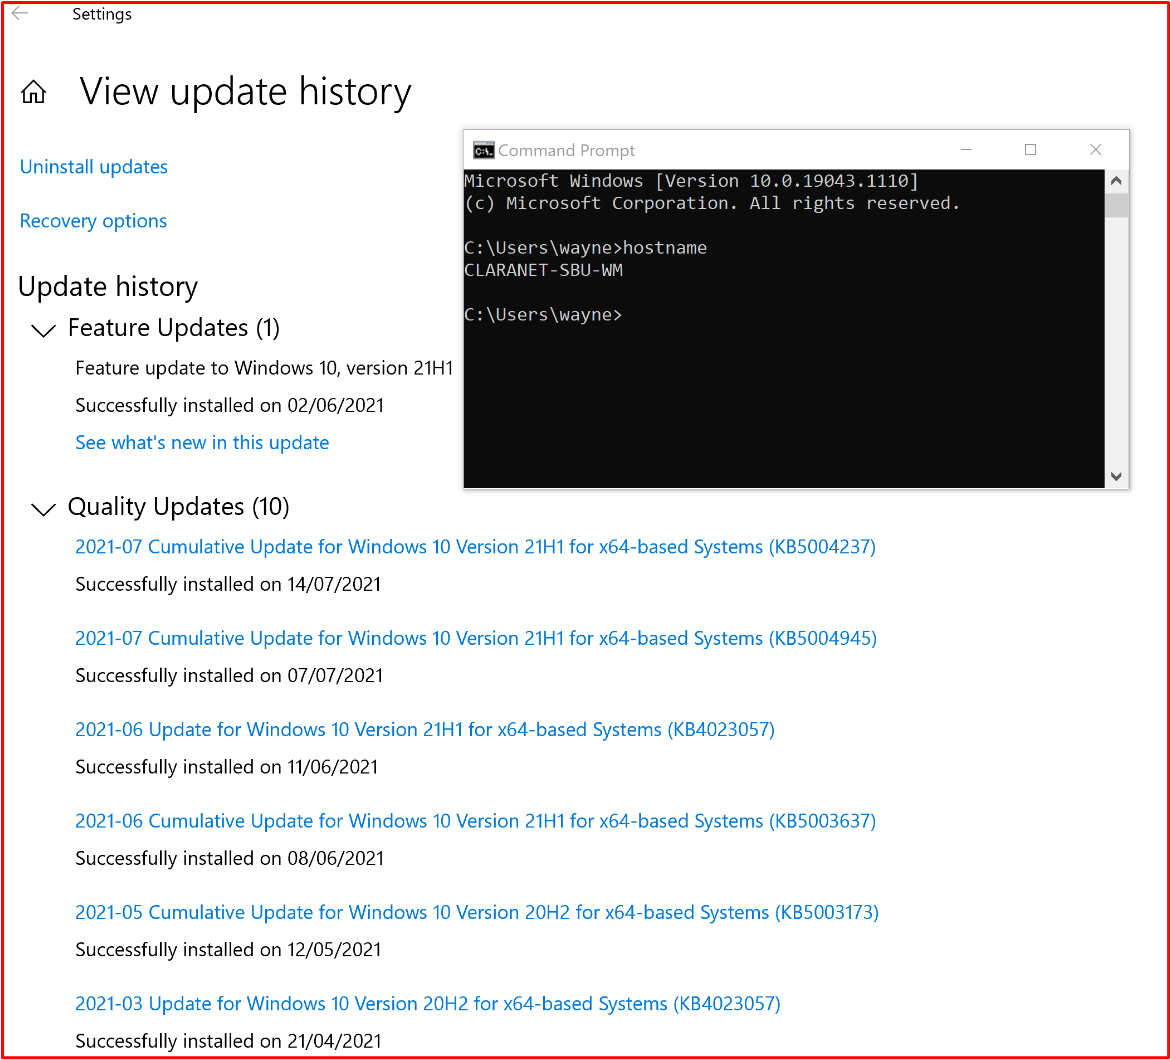 screenshot shows that the in scope system component "CLARANET-SBU-WM" is carrying out Windows updates in line with the patching policy.